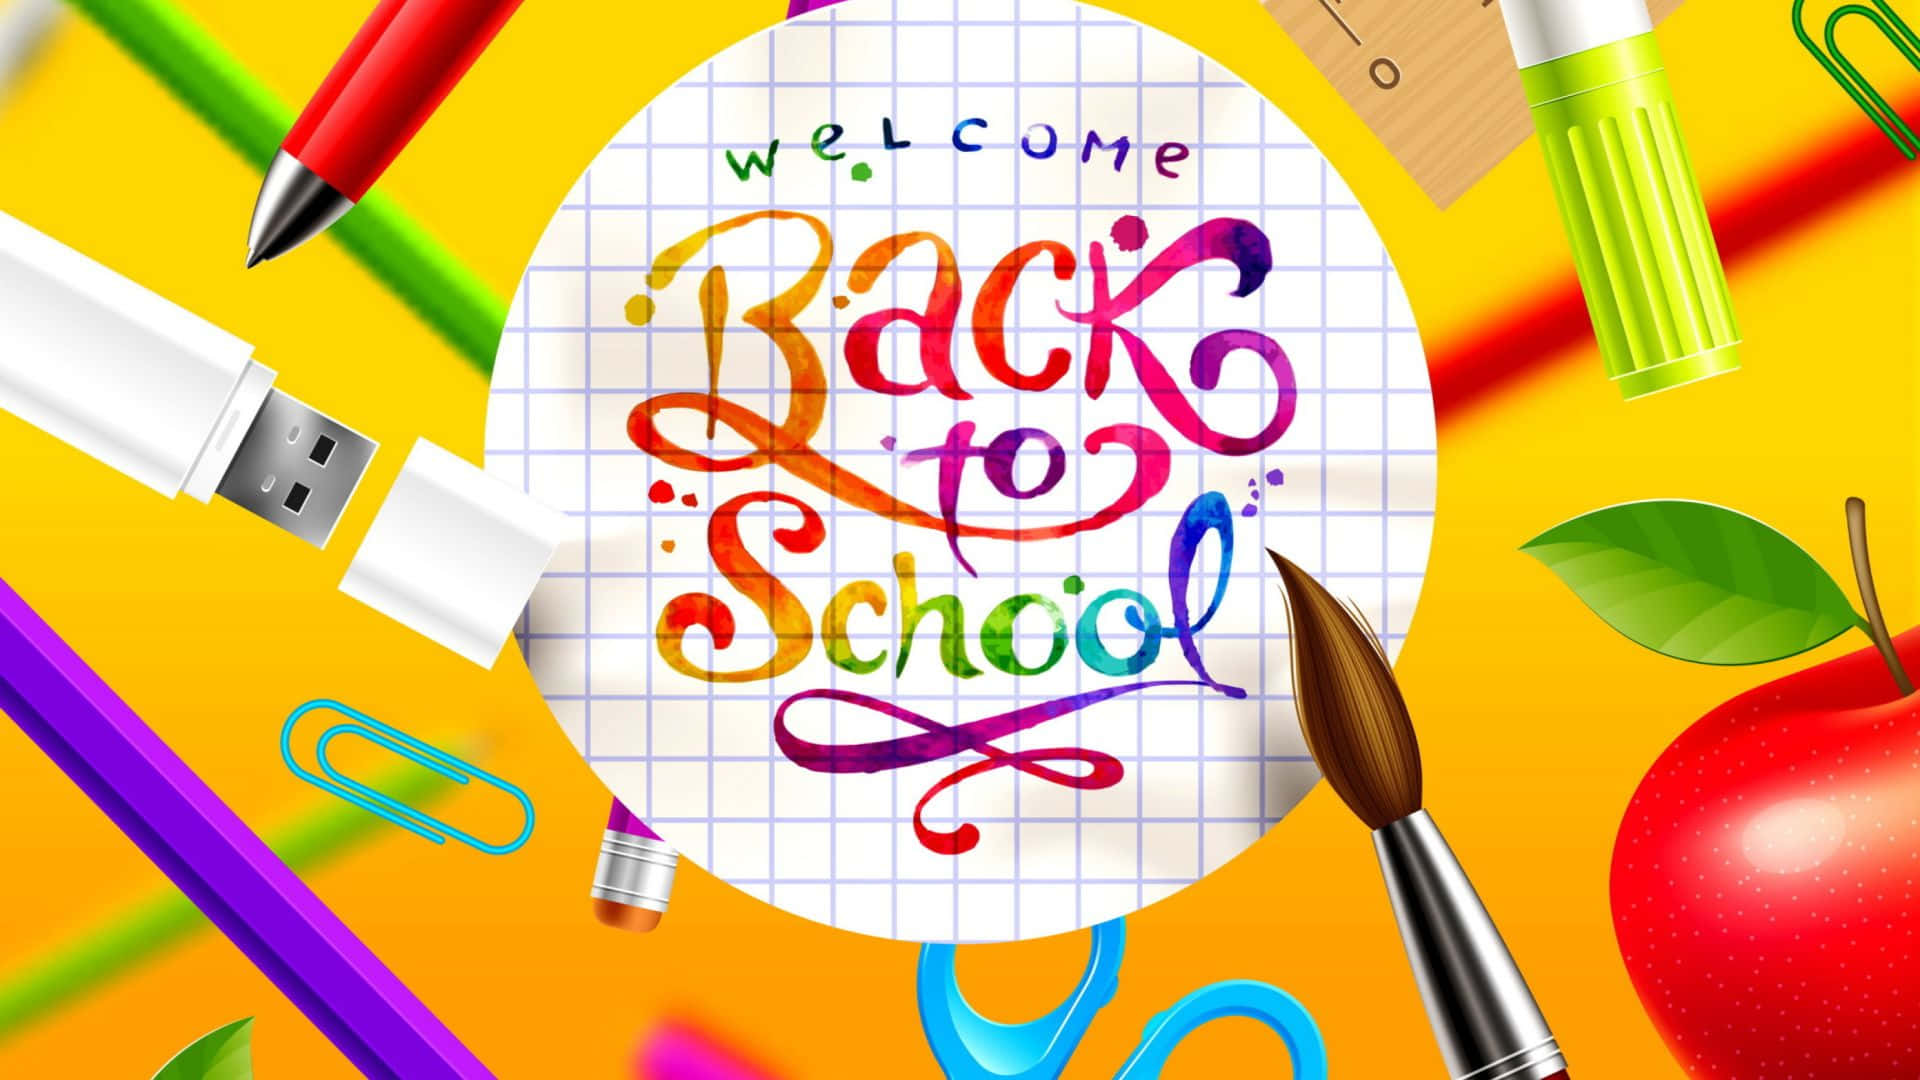 Cool School - Learn something new every day Wallpaper